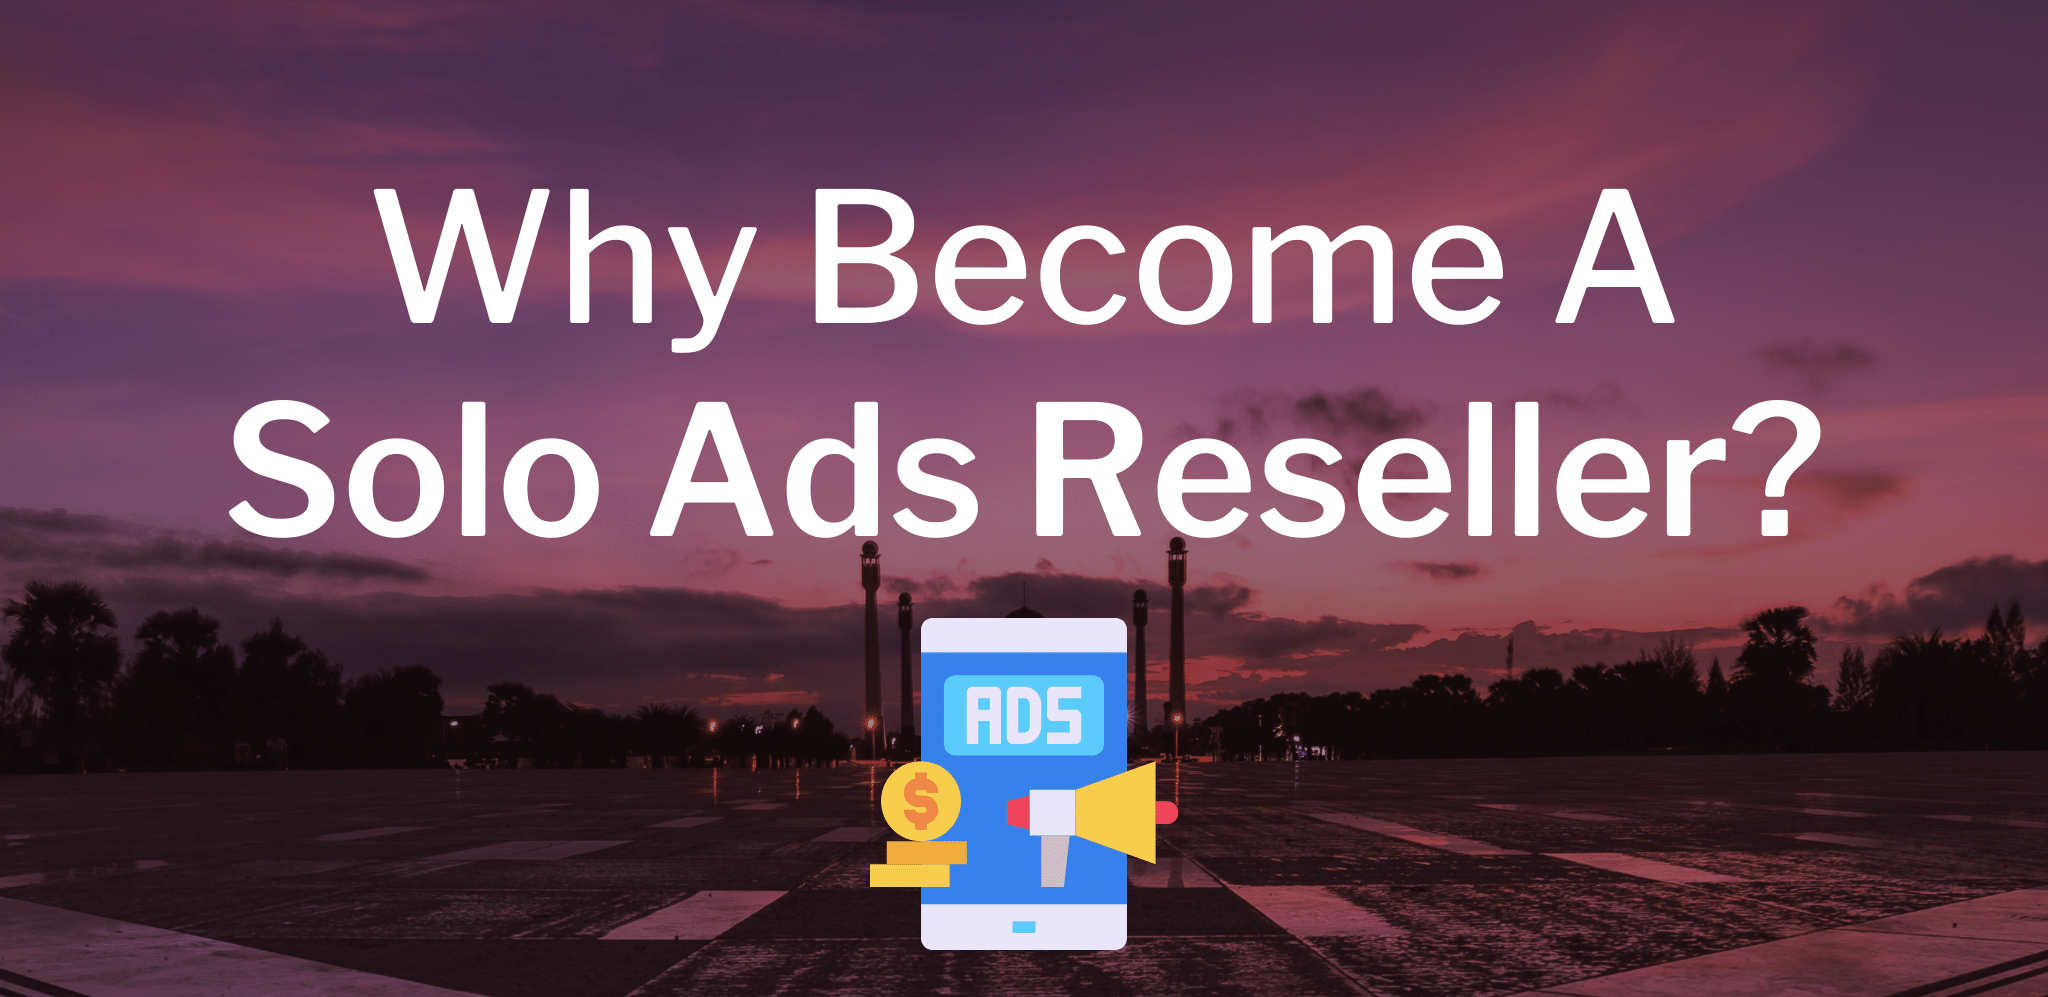 Why Become A Solo Ads Reseller